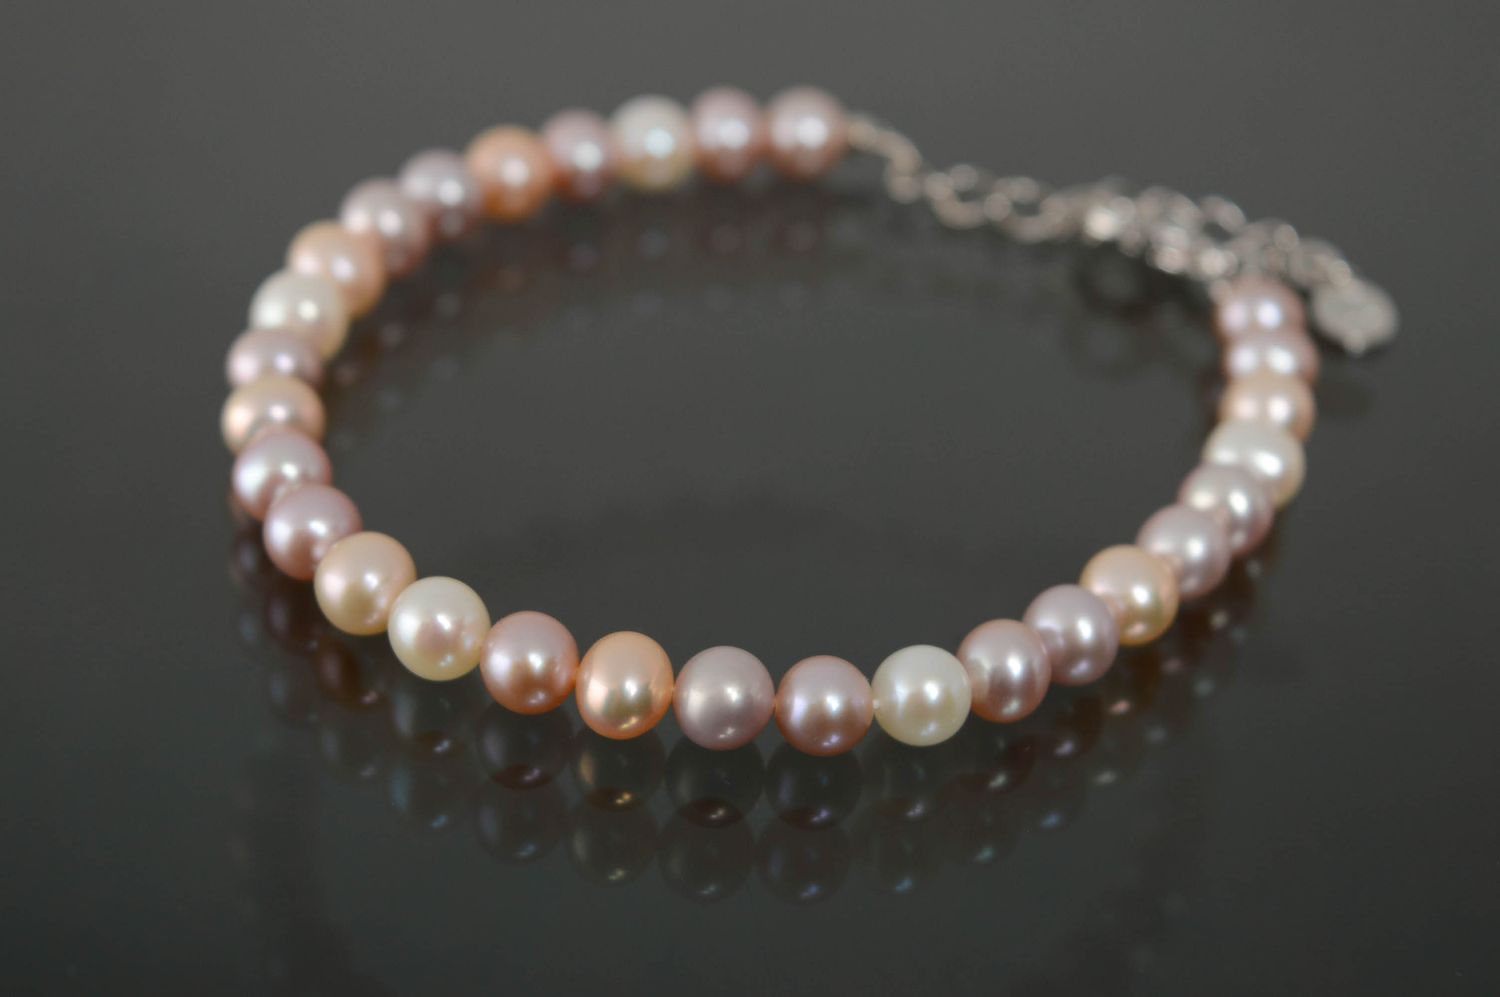 Pearl bracelet with light beads photo 1